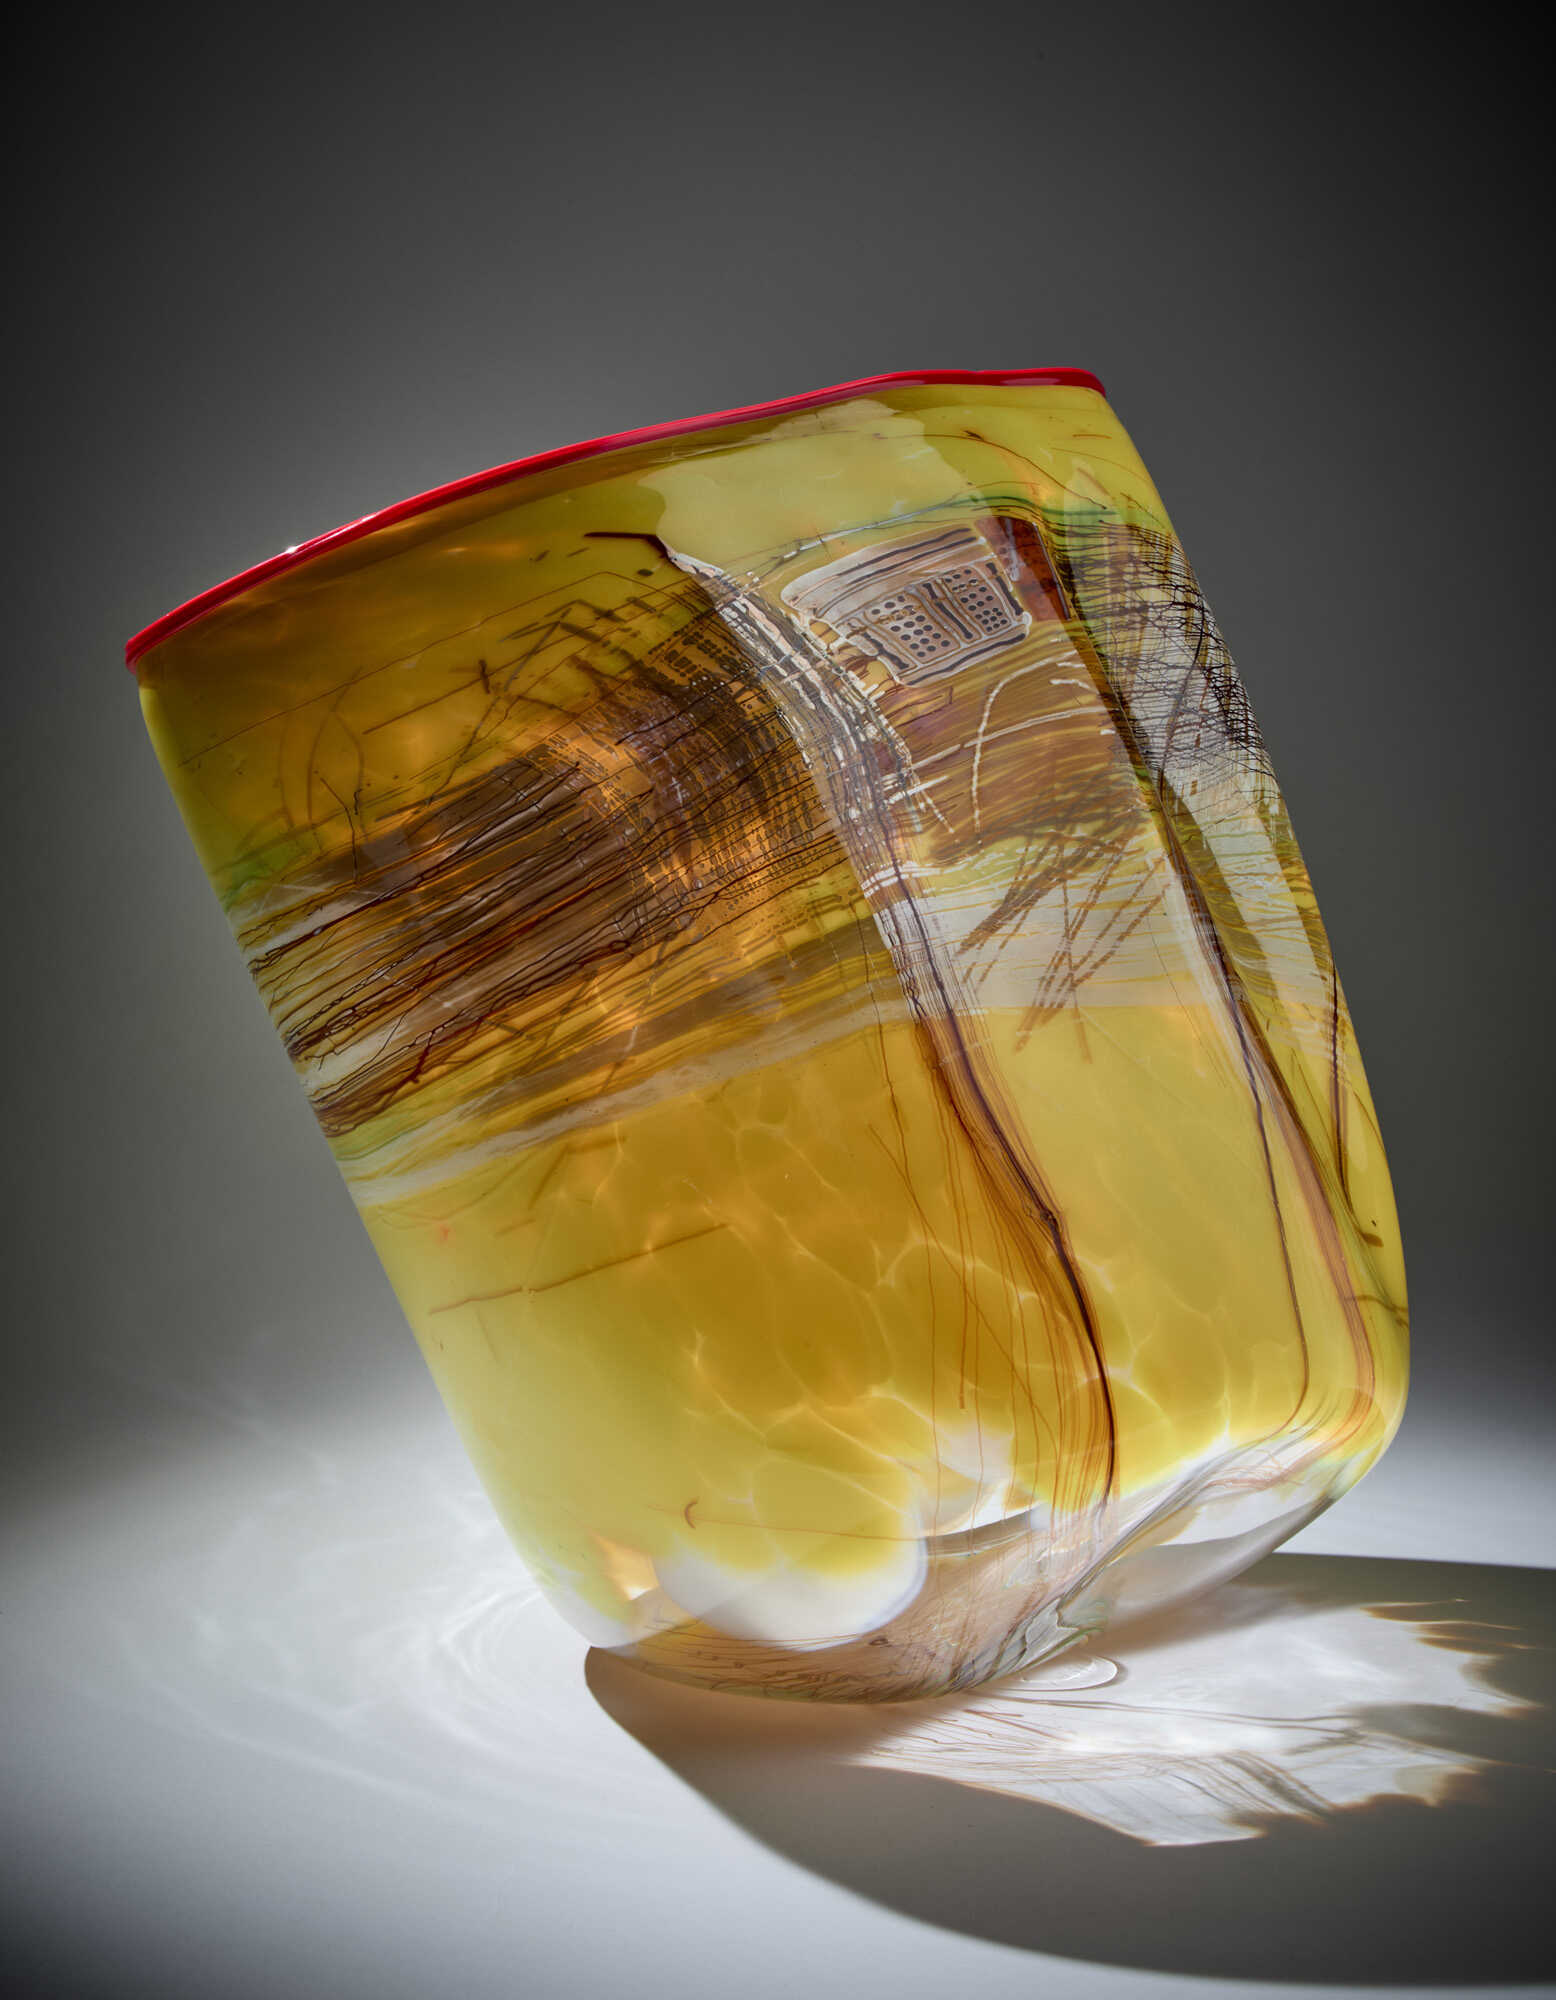 Large sculpture vase of irregular shape, attributable to the 'Soft Cylinders' series. Usa, 1996. Crystal and matt yellow blown glass with dark amethyst and lattimo glass filaments and murrine. Signed and dated with engraving under the base. (37.5x42.